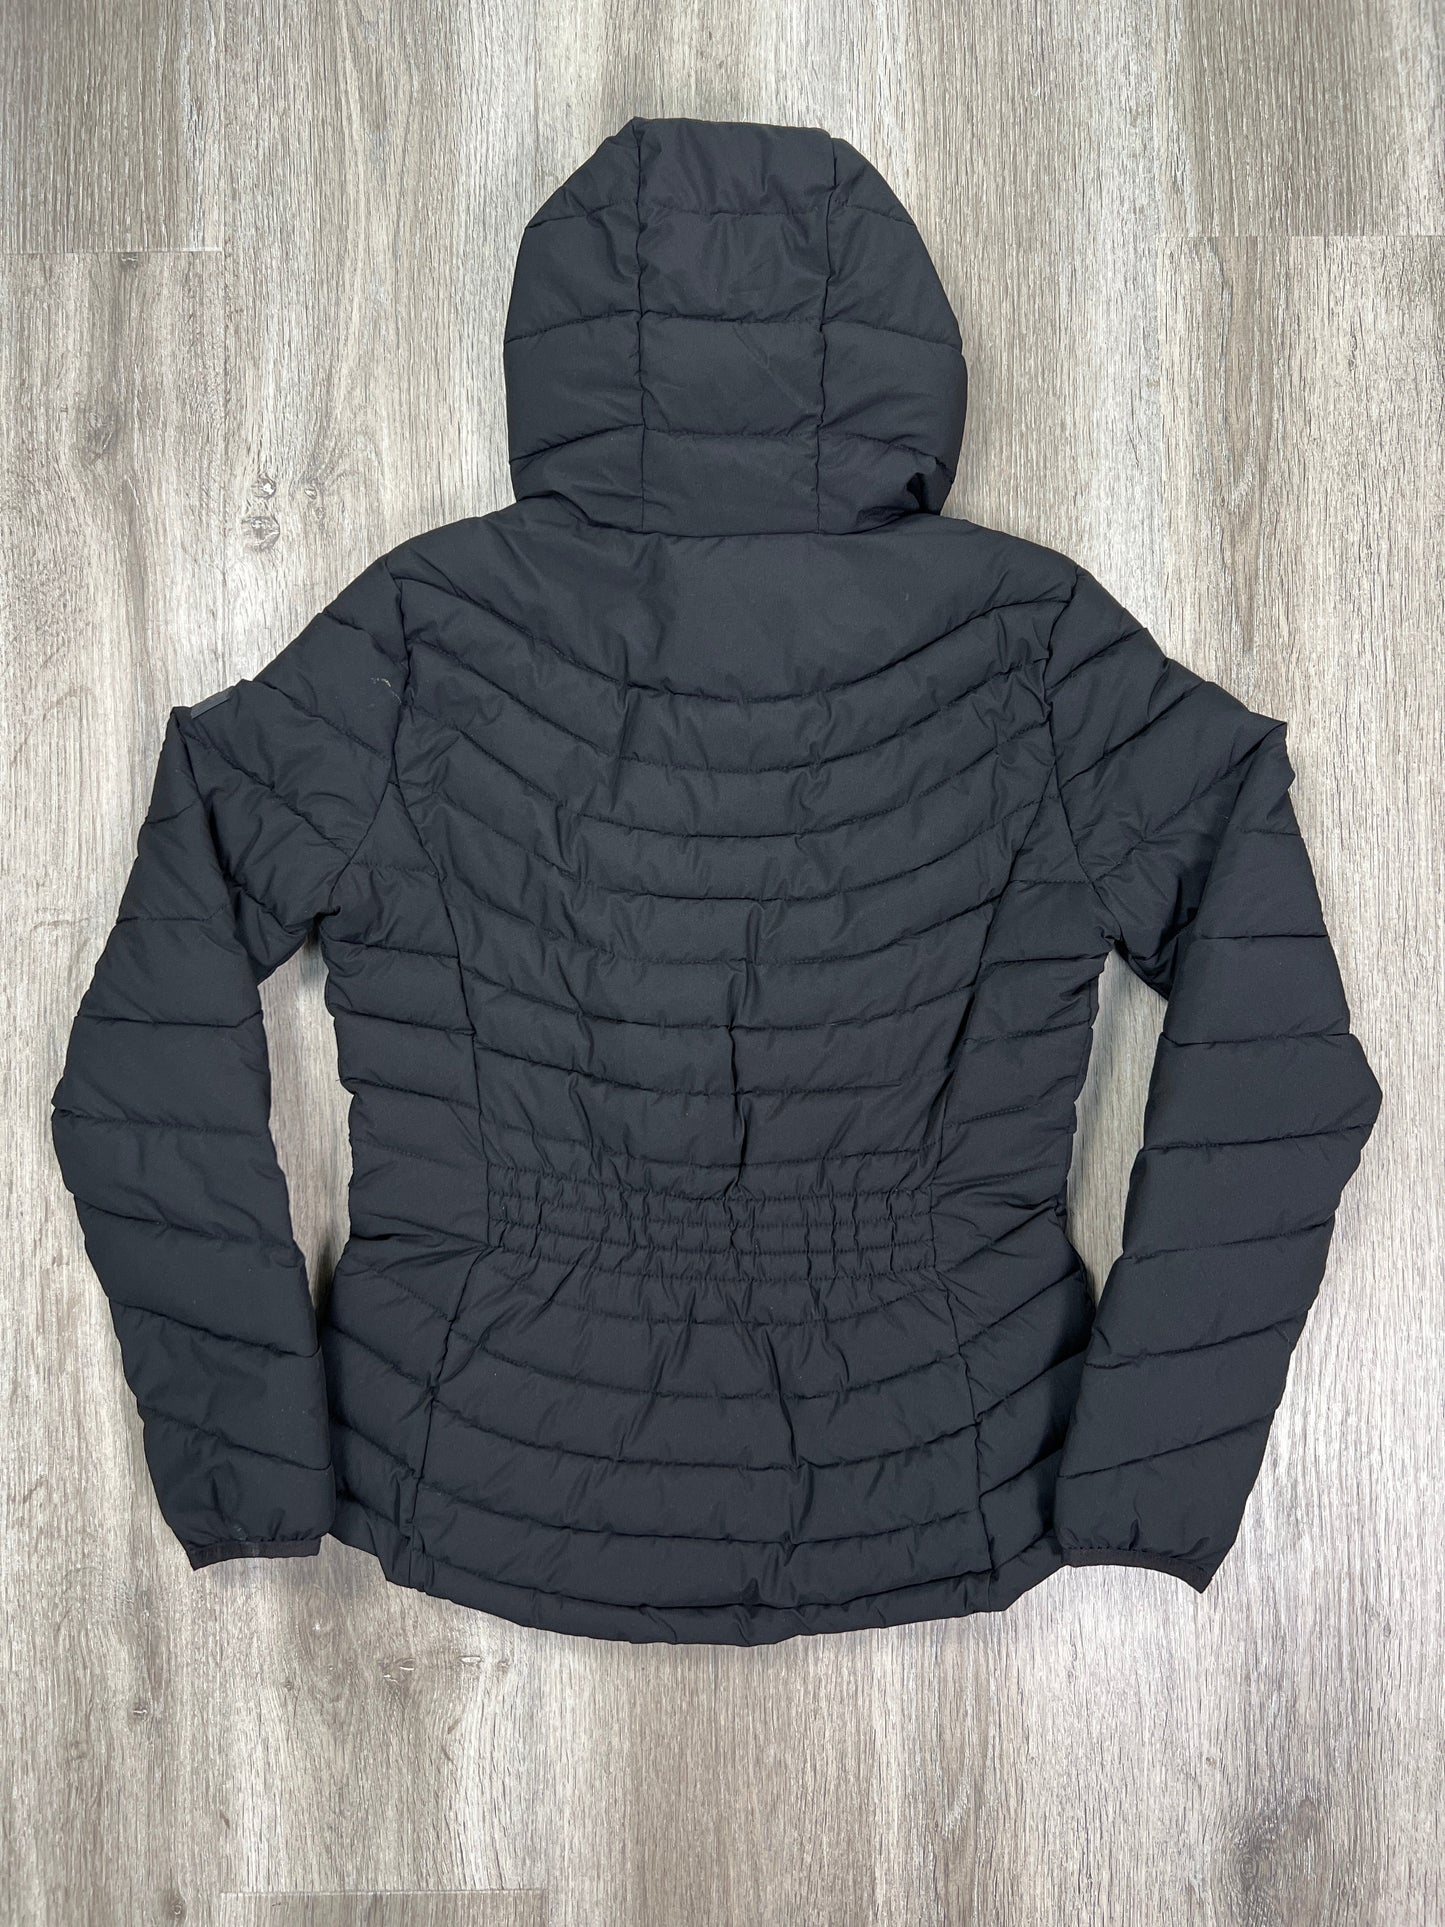 Black Jacket Puffer & Quilted Calvin Klein, Size Xs